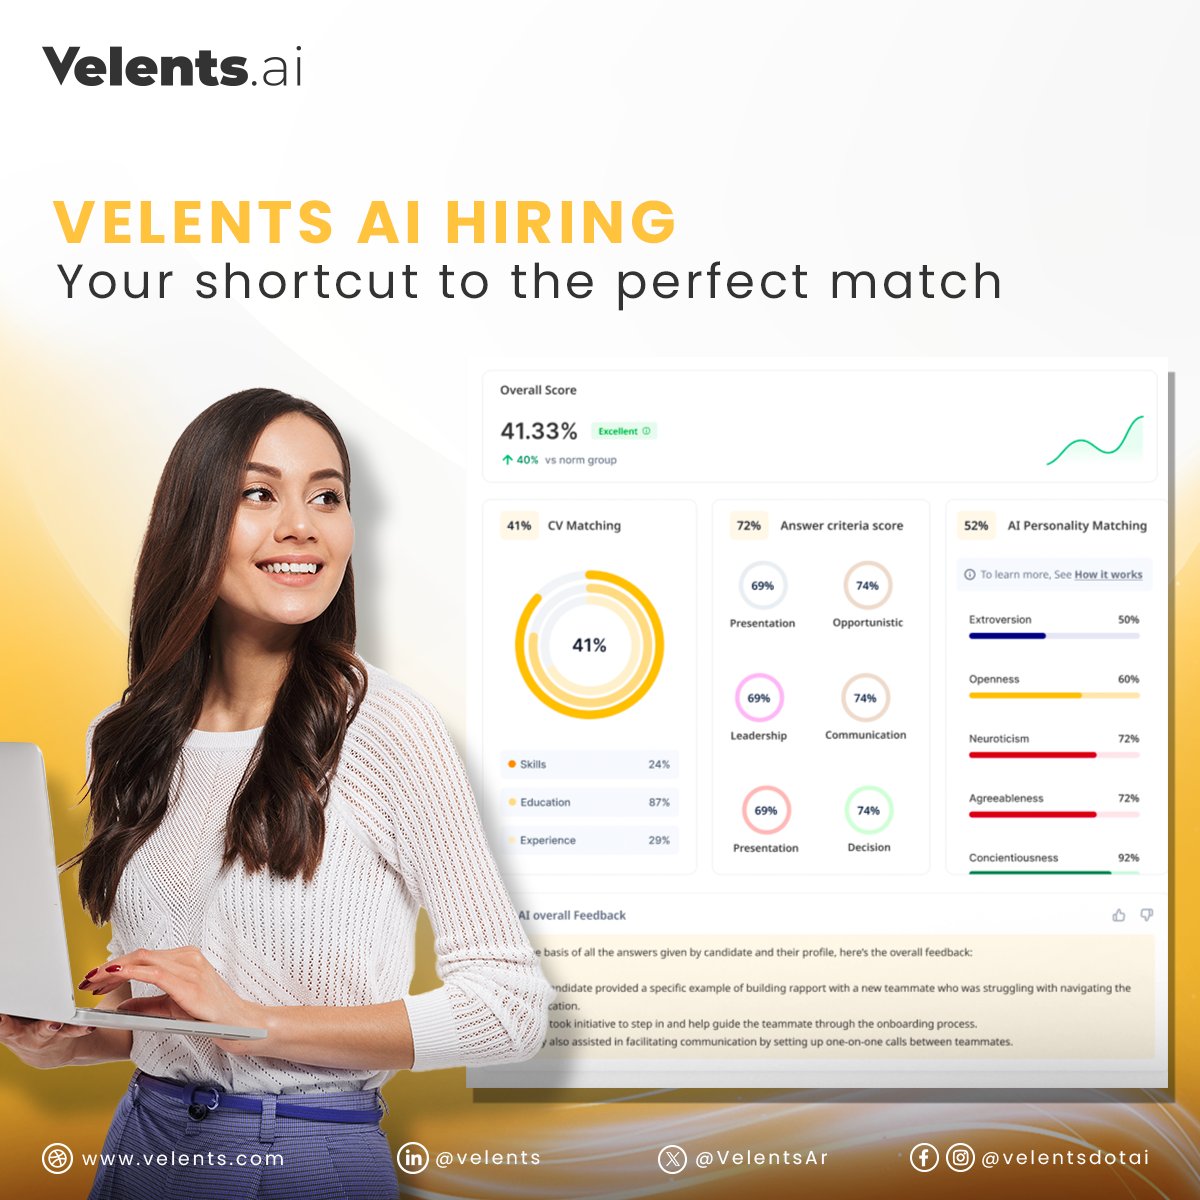 Don't waste another minute on endless hiring tasks! Velents #AI Hiring: Your shortcut to more time, higher productivity, hitting every deadline and hiring the perfect candidate!

Try it Now for FREE:
🔗 bit.ly/3rLFlqo

#AIinHiring #HR #Recruitment